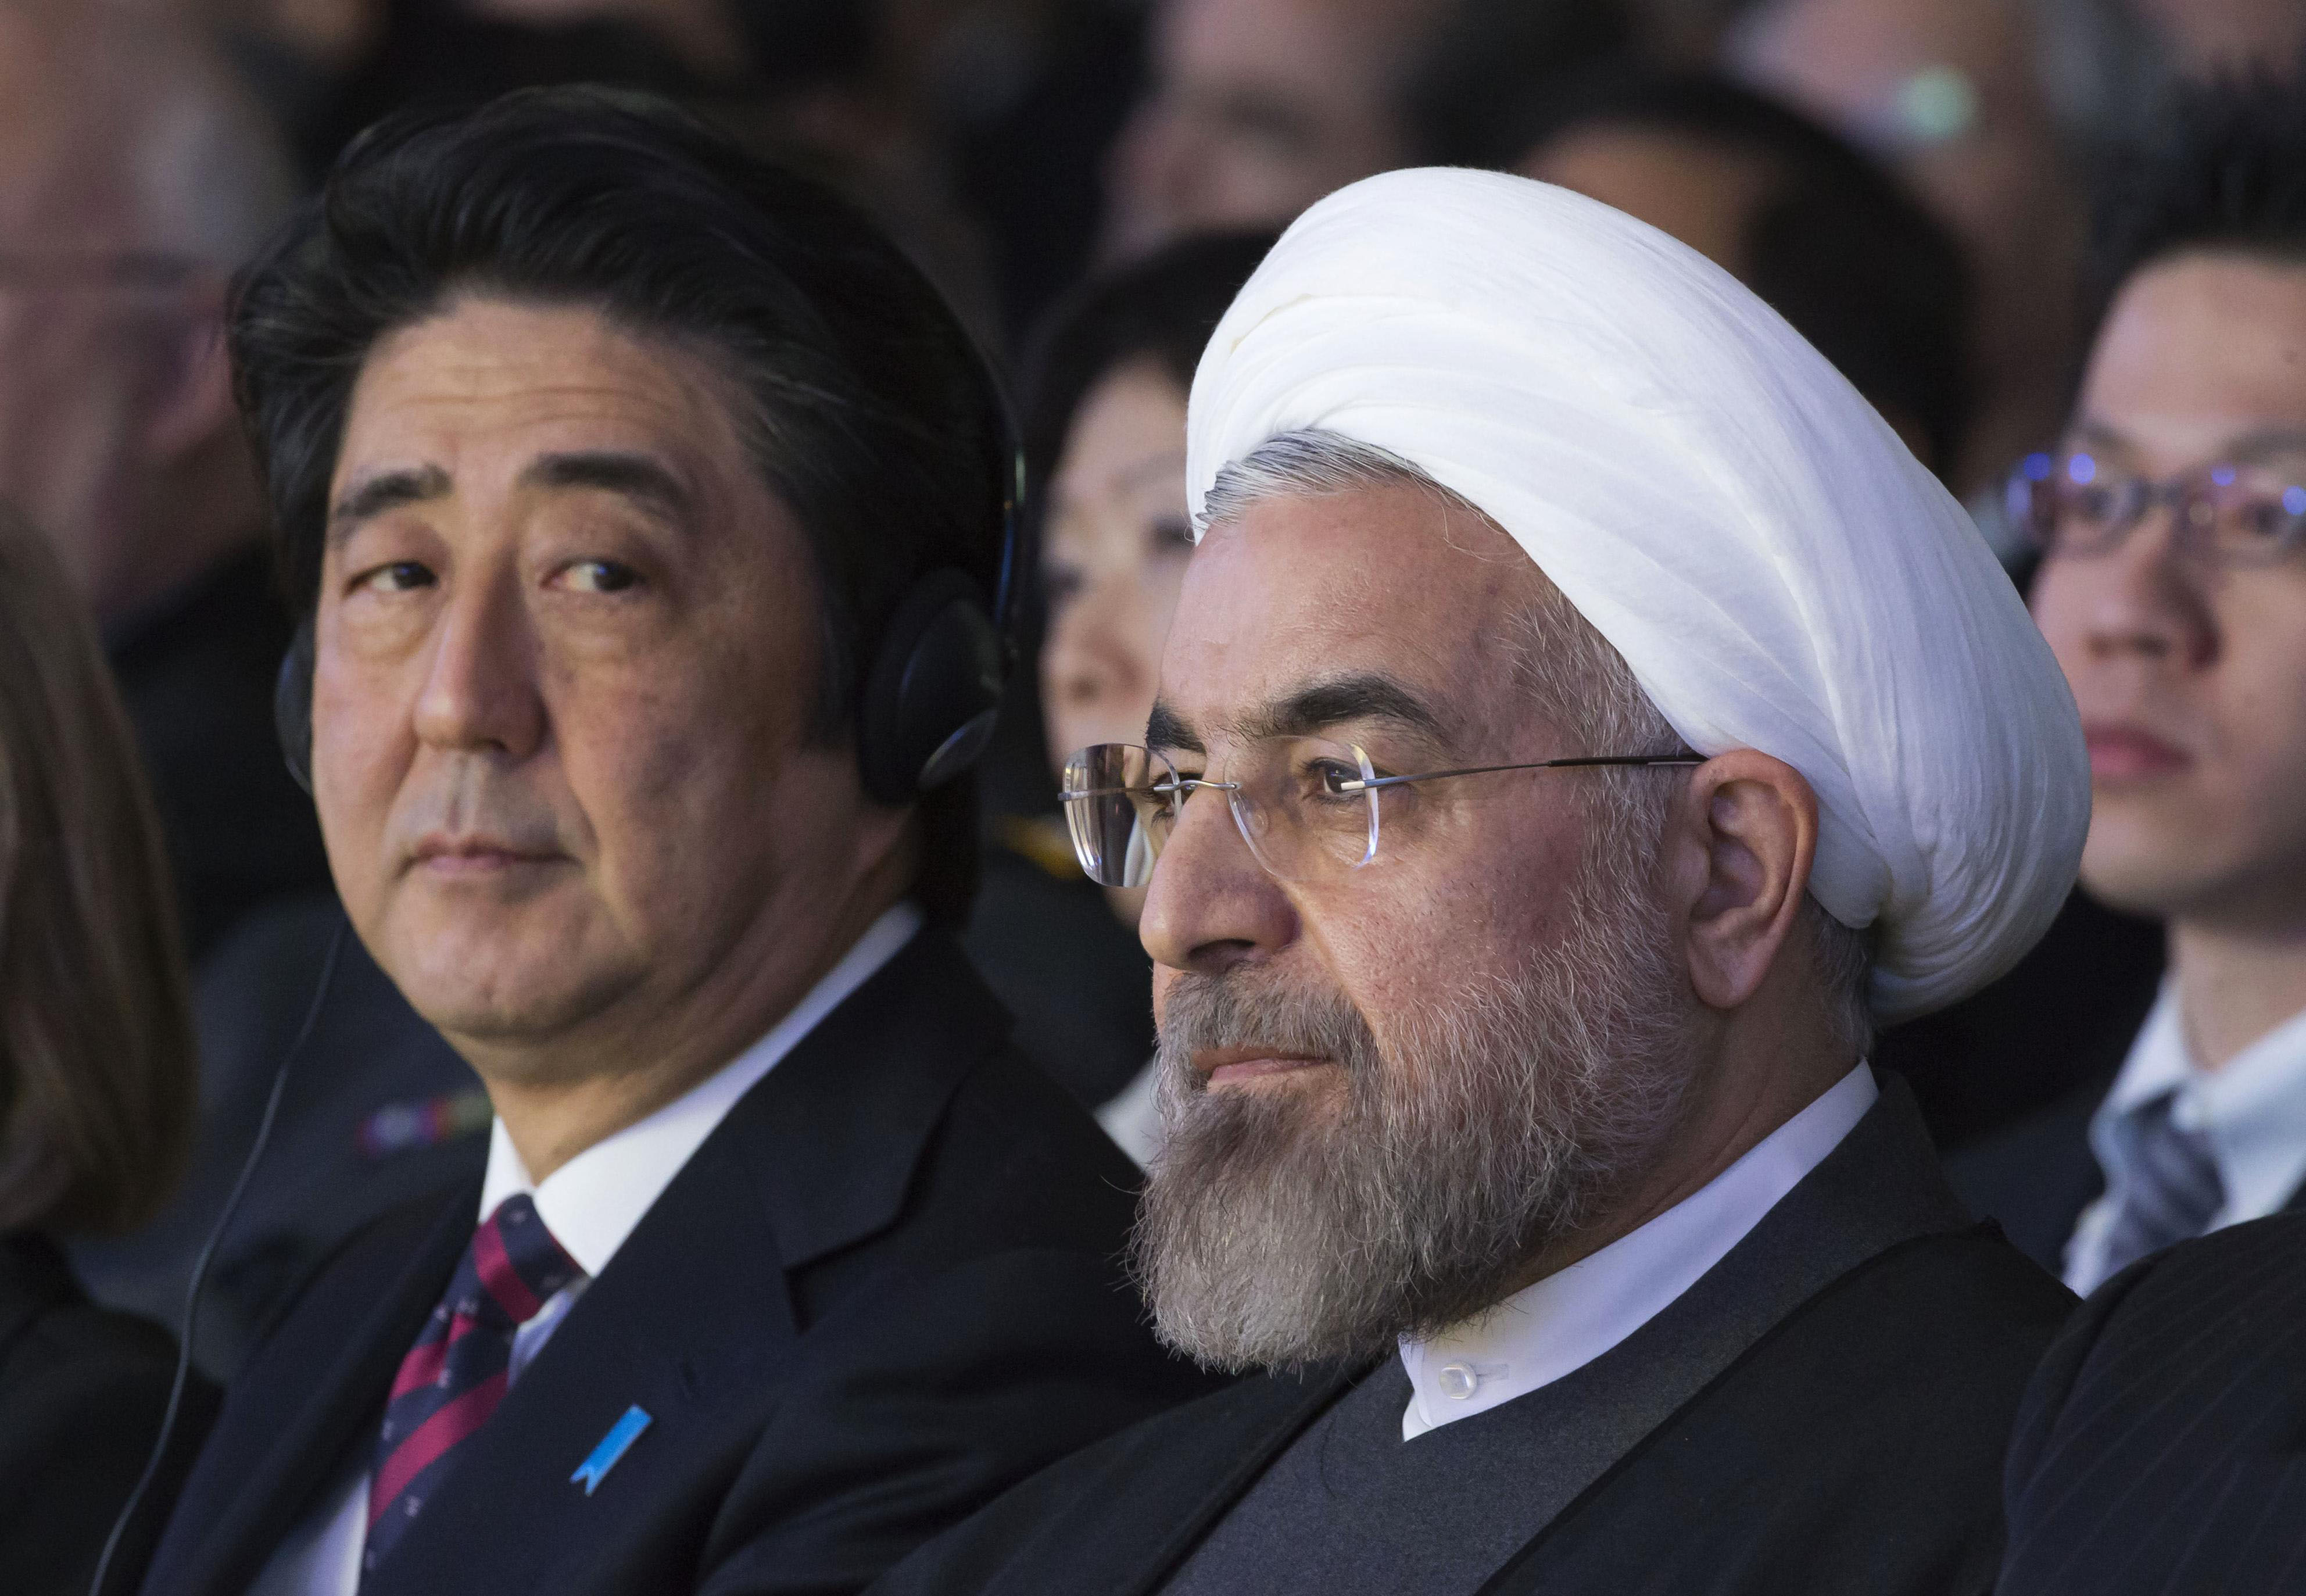 Japanese PM, FM felicitate Rouhani’s victory